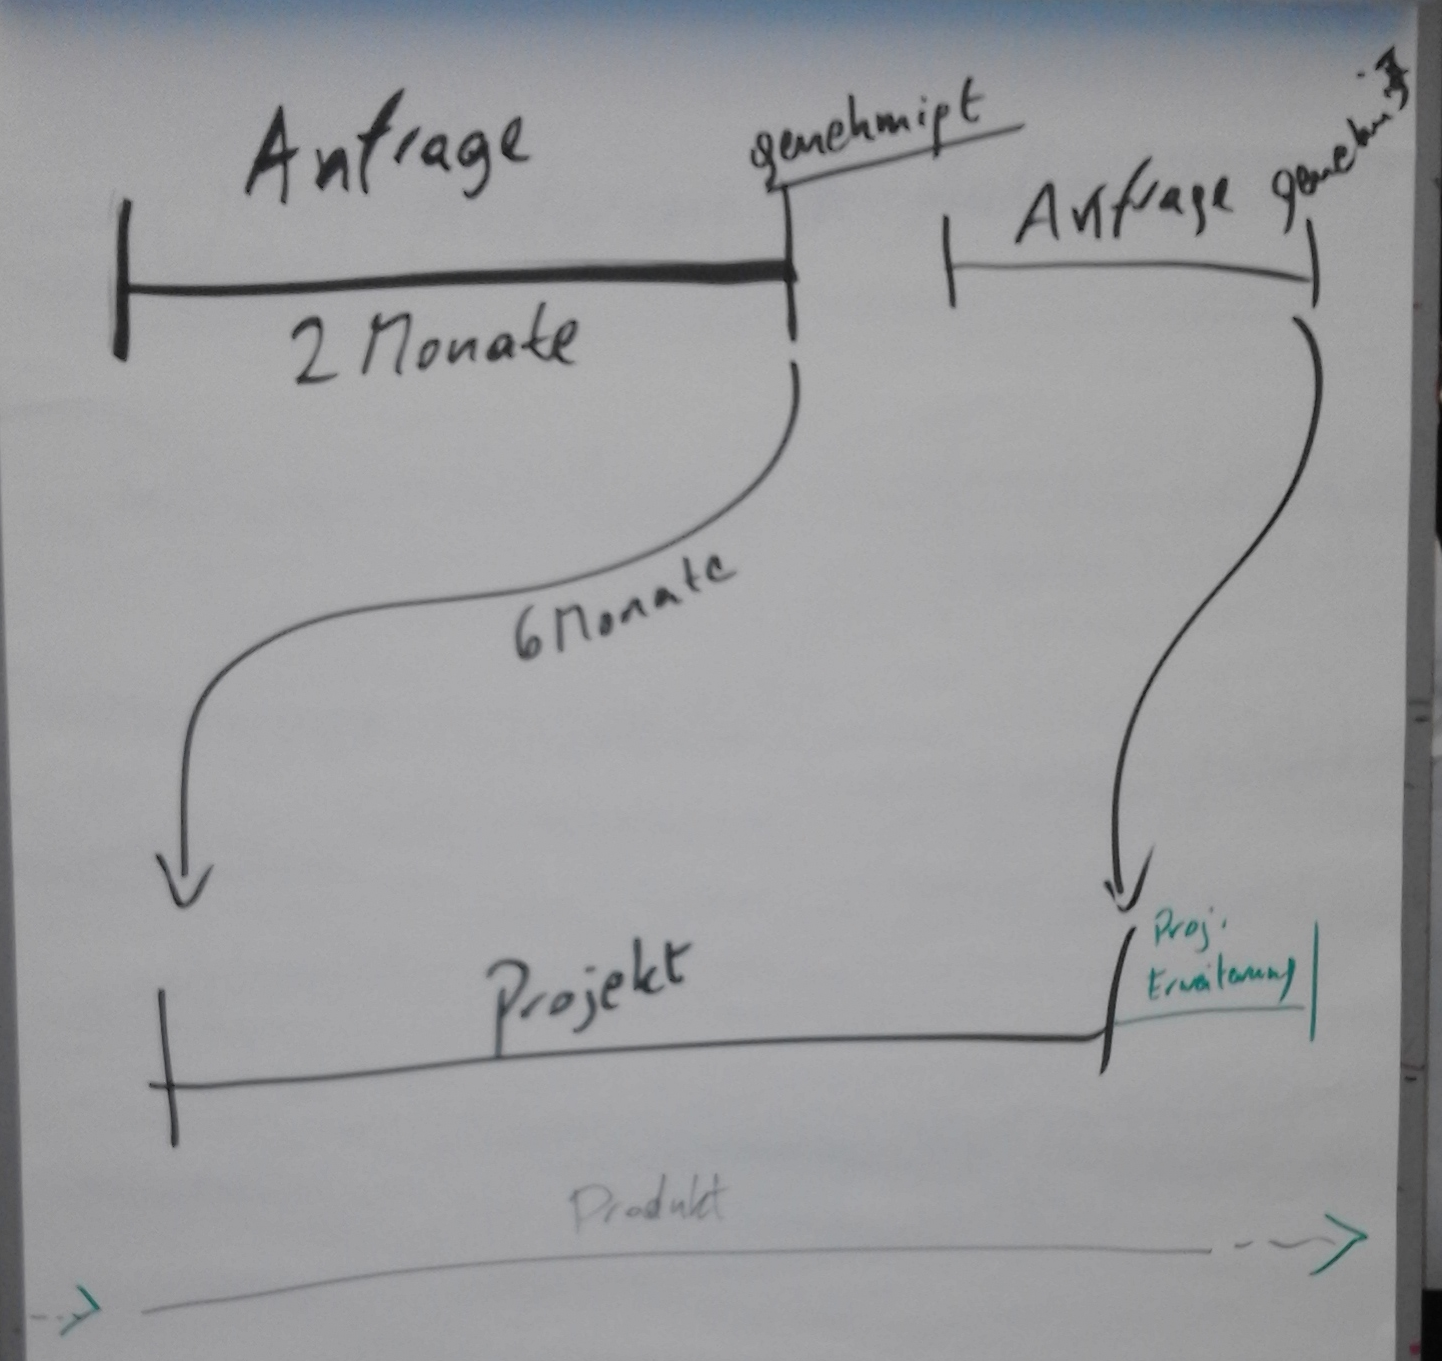 approval process in the context of timelines